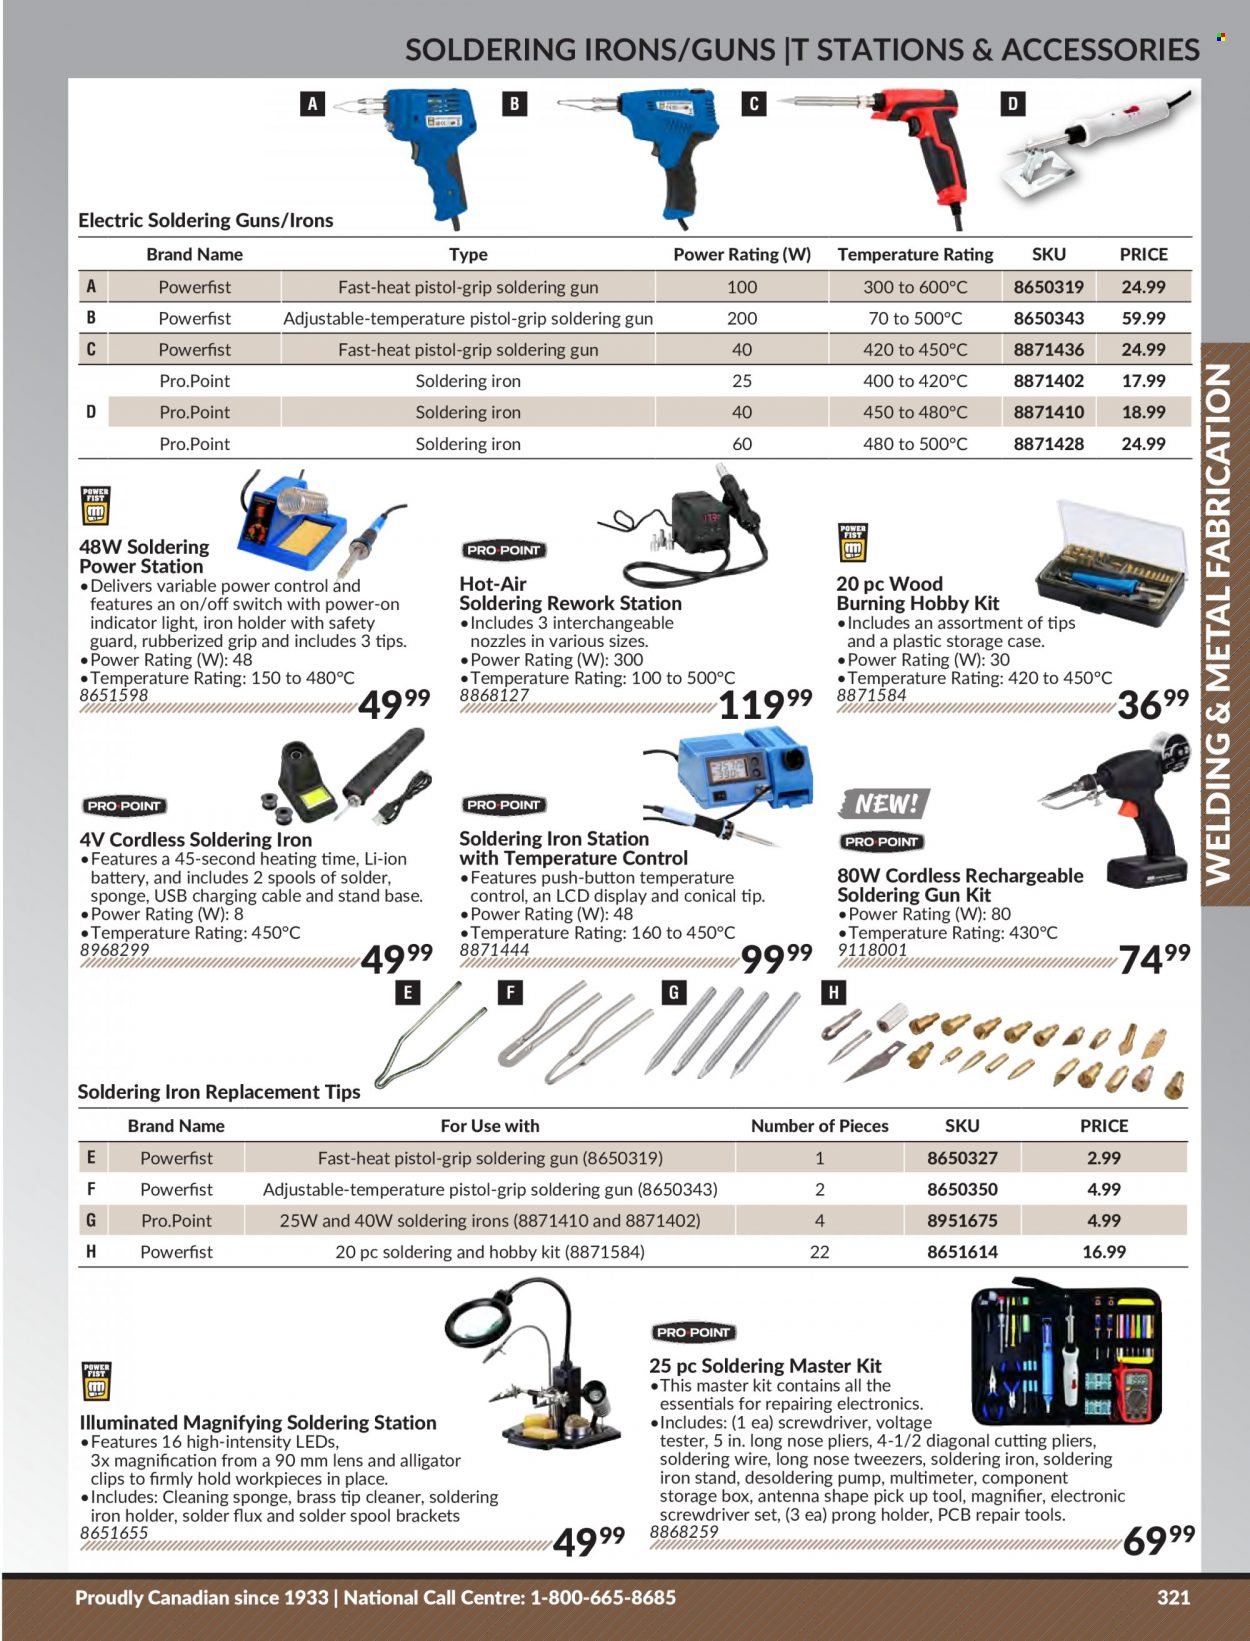 thumbnail - Princess Auto Flyer - Sales products - screwdriver, pliers, screwdriver set, soldering iron, soldering station, garden storage box, cleaner. Page 329.